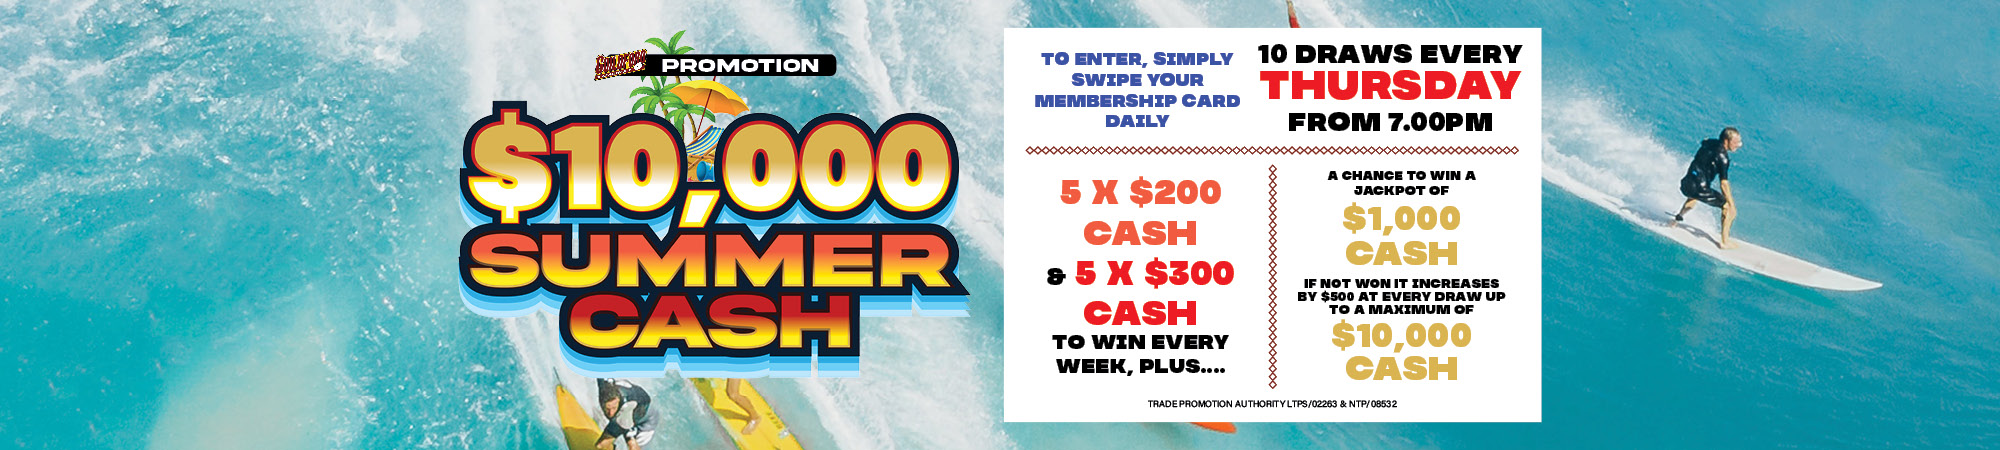 $10,000 Summer Cash at Guildford Leagues. To enter, simply swipe your membership card daily10 draws every Thursday from 7.00pm.